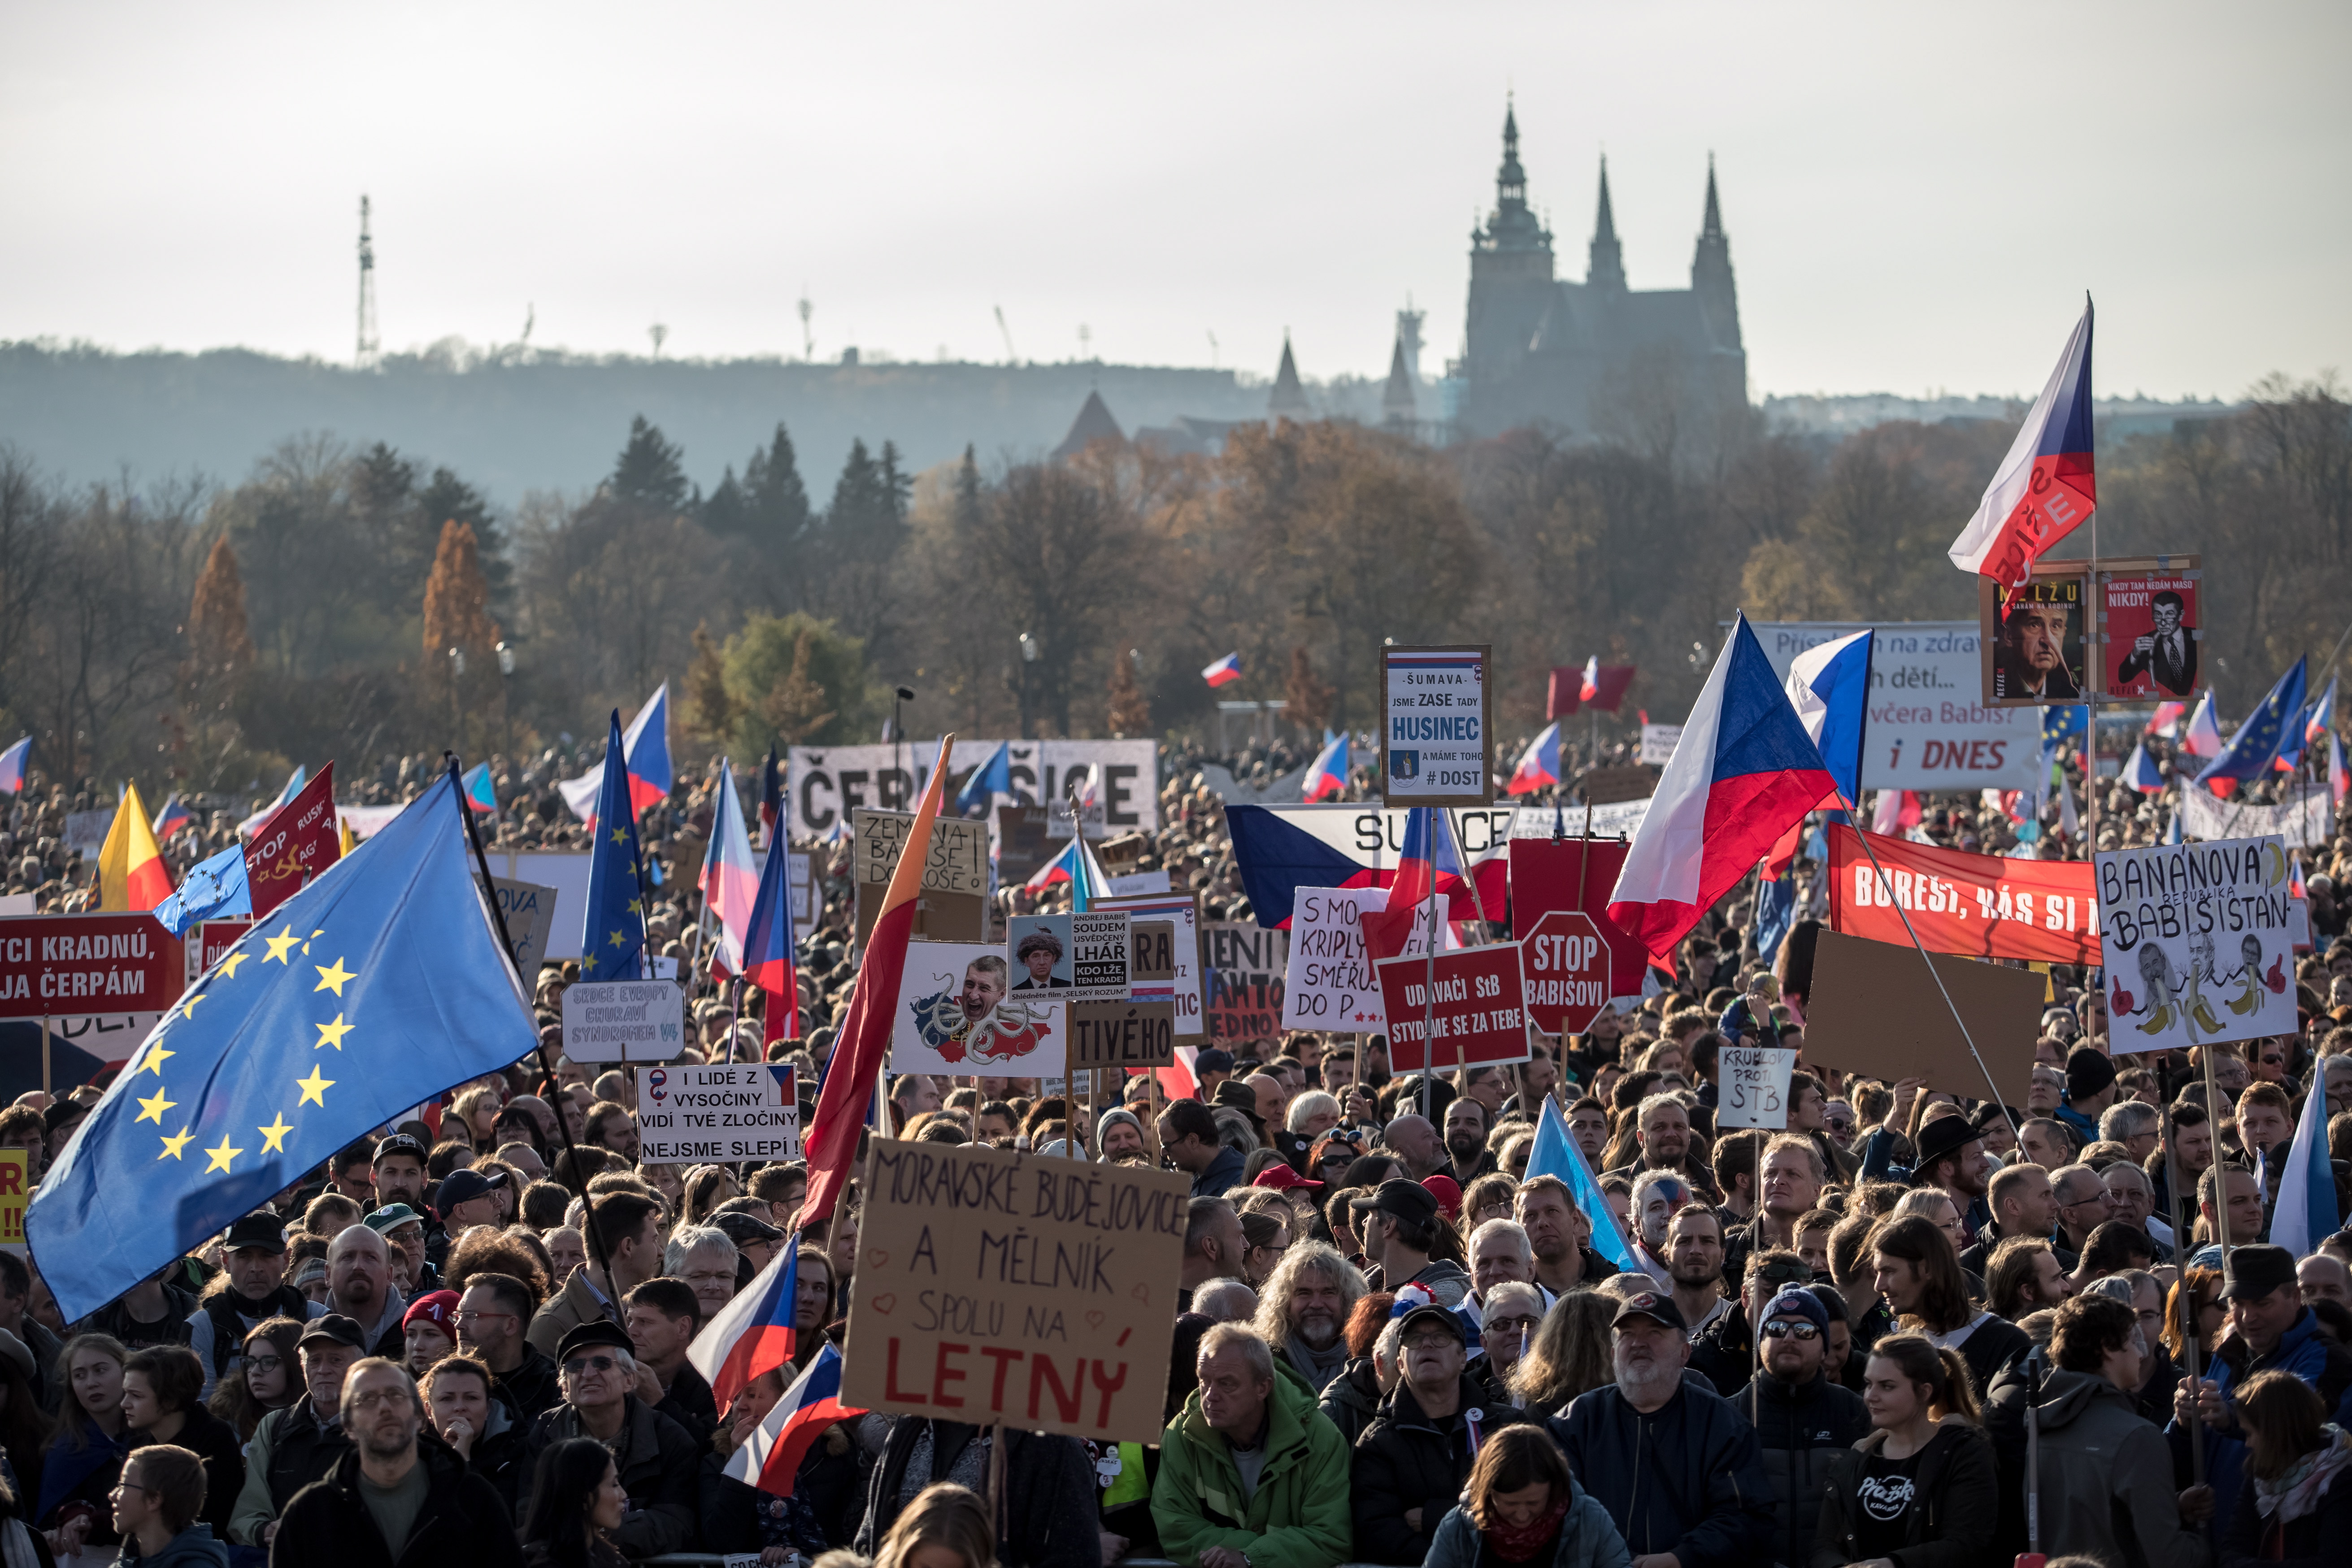 epa08001408 Demonstrators carry placards and flags as they gather to protest against Czech Prime Minister Andrej Babis, a day before the 30th anniversary of the so-called 'Velvet Revolution', at the Letna plain in Prague, Czech Republic, 16 November 2019. Tens of thousands of people were demanding the resignation of Babis due to alleged conflicts of interest involving his former Agrofert conglomerate he founded. According to chairman of the 'Million Moments for Democracy', Mikulas Minar, who organized the protest, Babis is abusing media and political power to profit his companies. The Czech Republic celebrates the 30th anniversary of their 'Velvet Revolution' commemorating the events of 17 November 1989, when waves of peaceful protests in both Czech and Slovak cities lasting ten days eventually brought down the Communist Government.  EPA/MARTIN DIVISEK